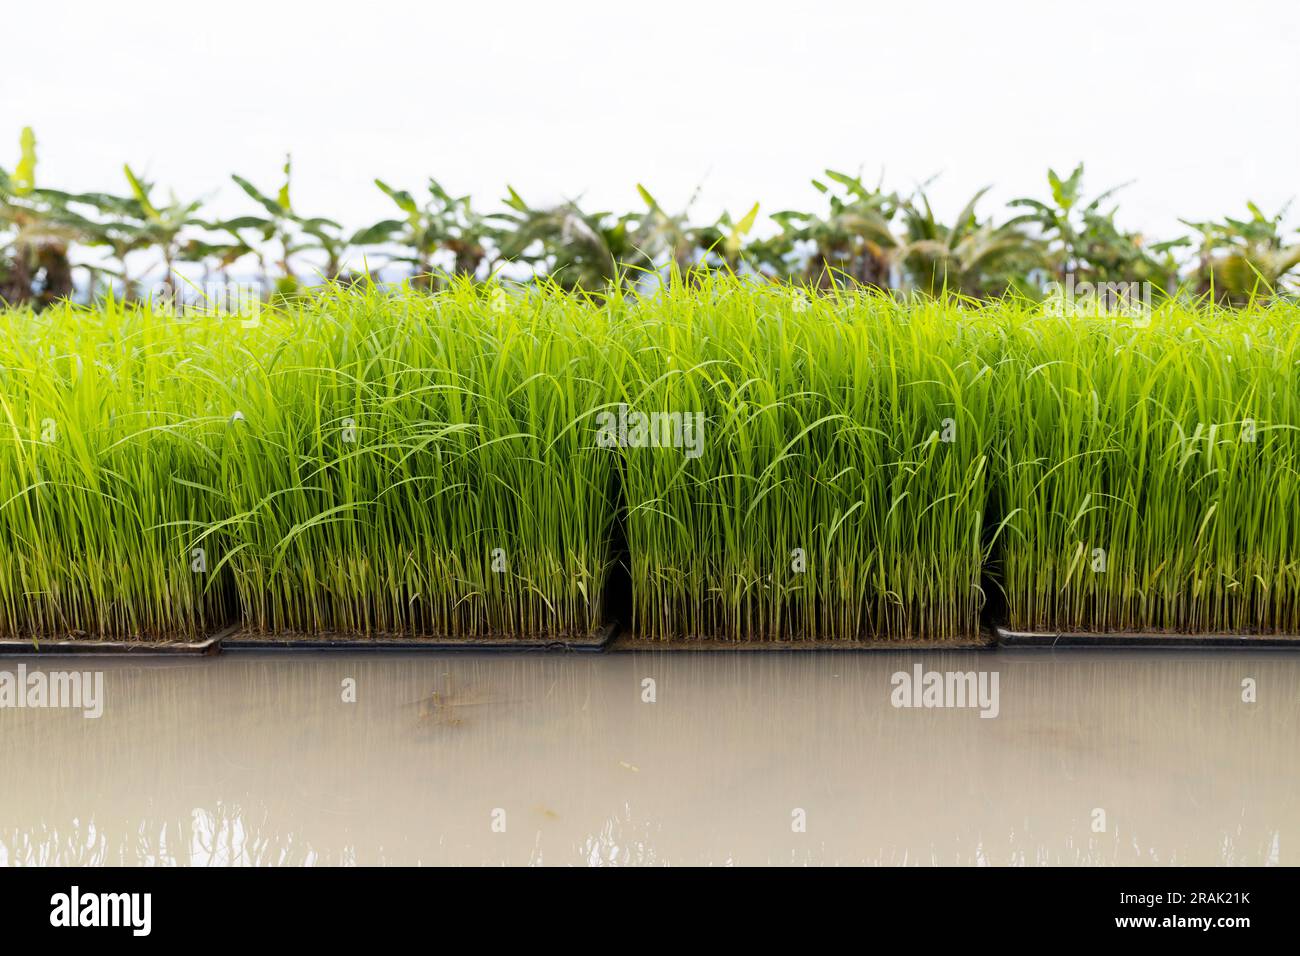 the latest advancements in rice planting machines and agricultural technology, empowering farmers in Thailand. Enhance productivity and rural liveliho Stock Photo